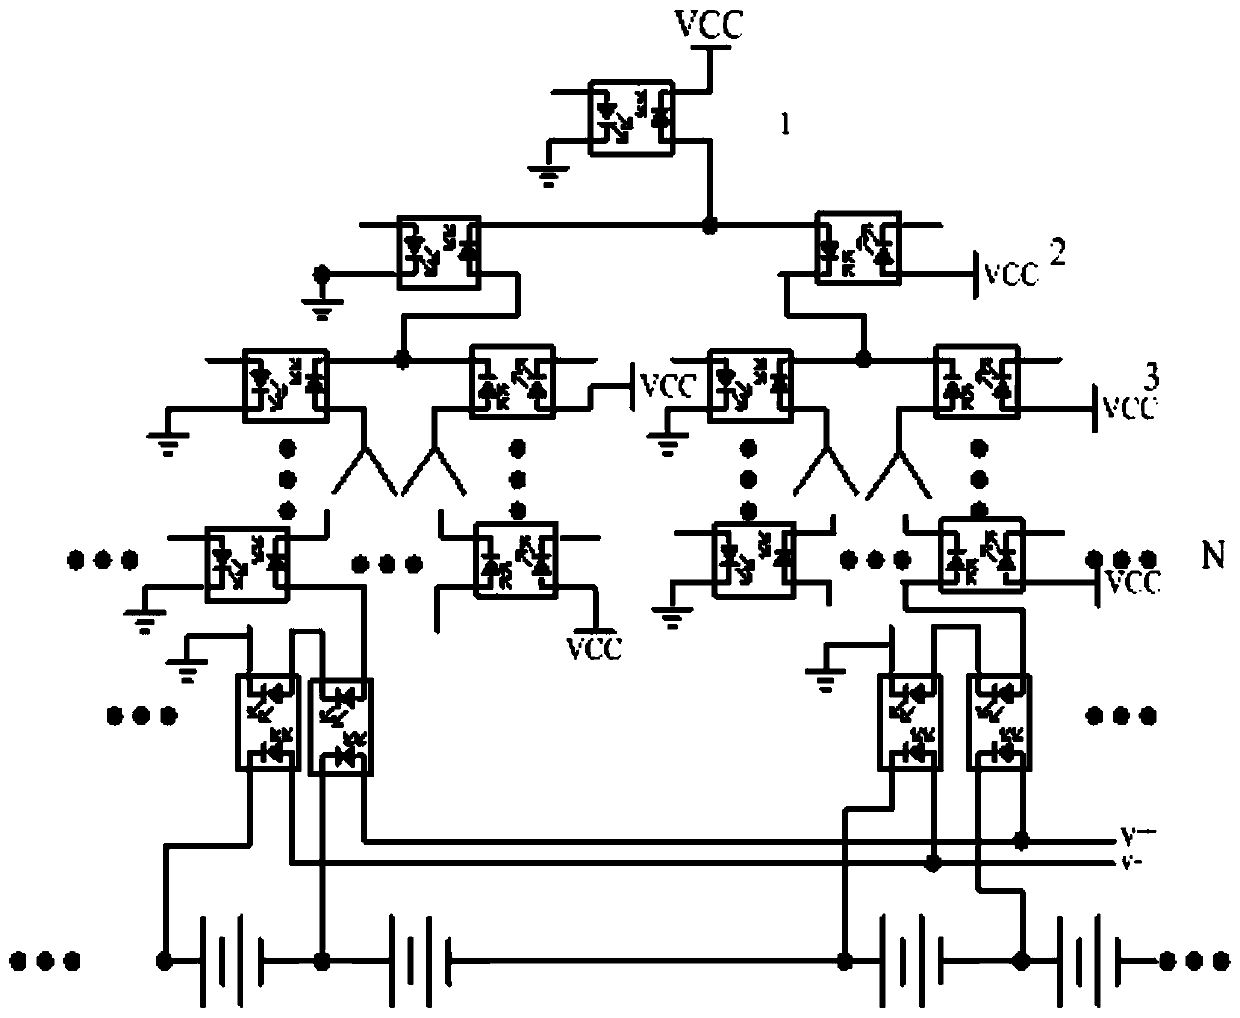 Battery module single voltage acquisition system based on traversal binary tree